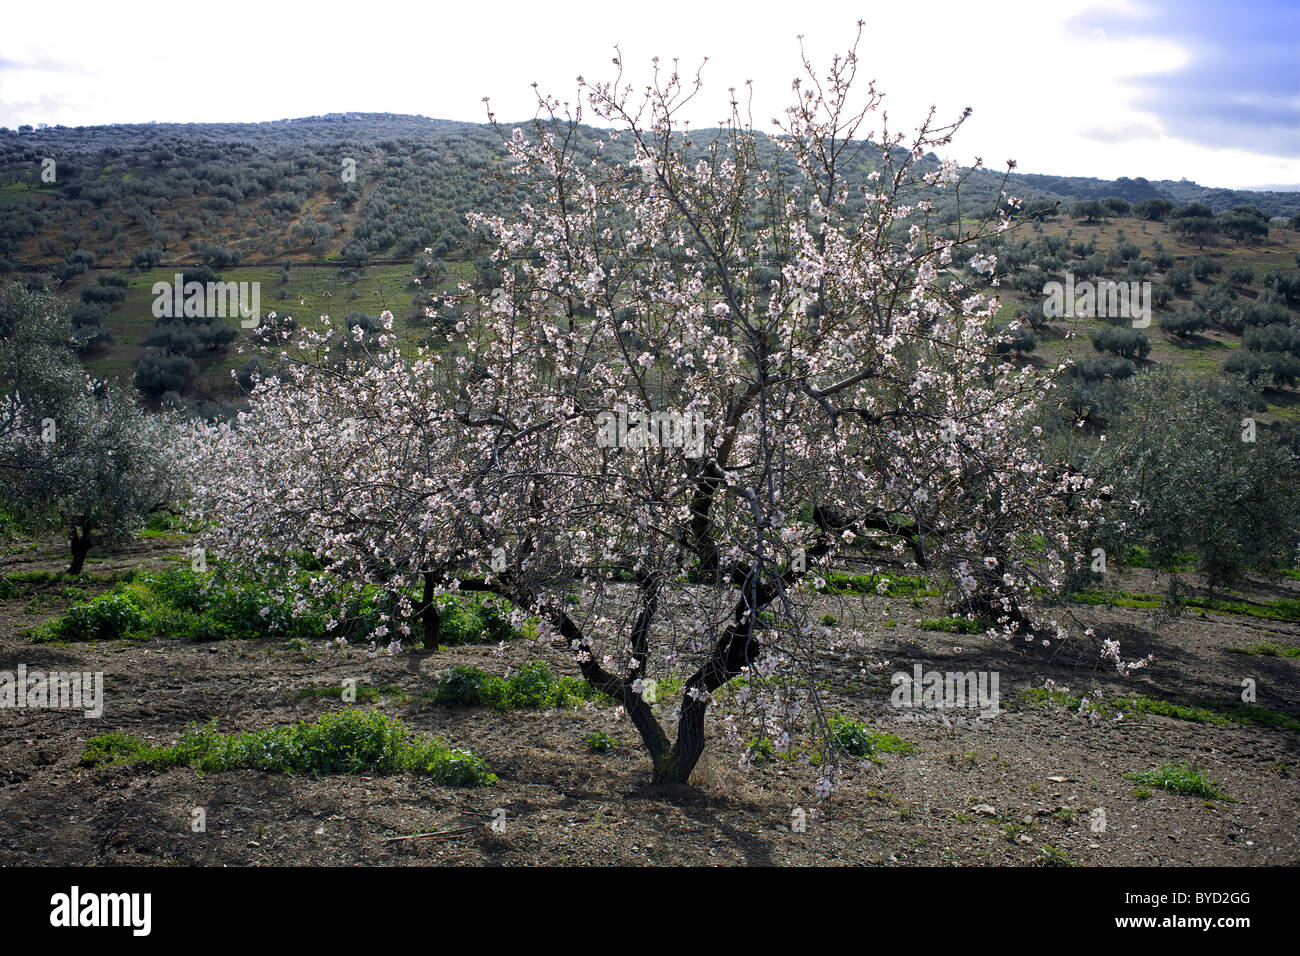 Almond tree in blossom, olive trees in the background, February, Andalucia, Spain, Europe, European, Spanish, Andalucia, Stock Photo